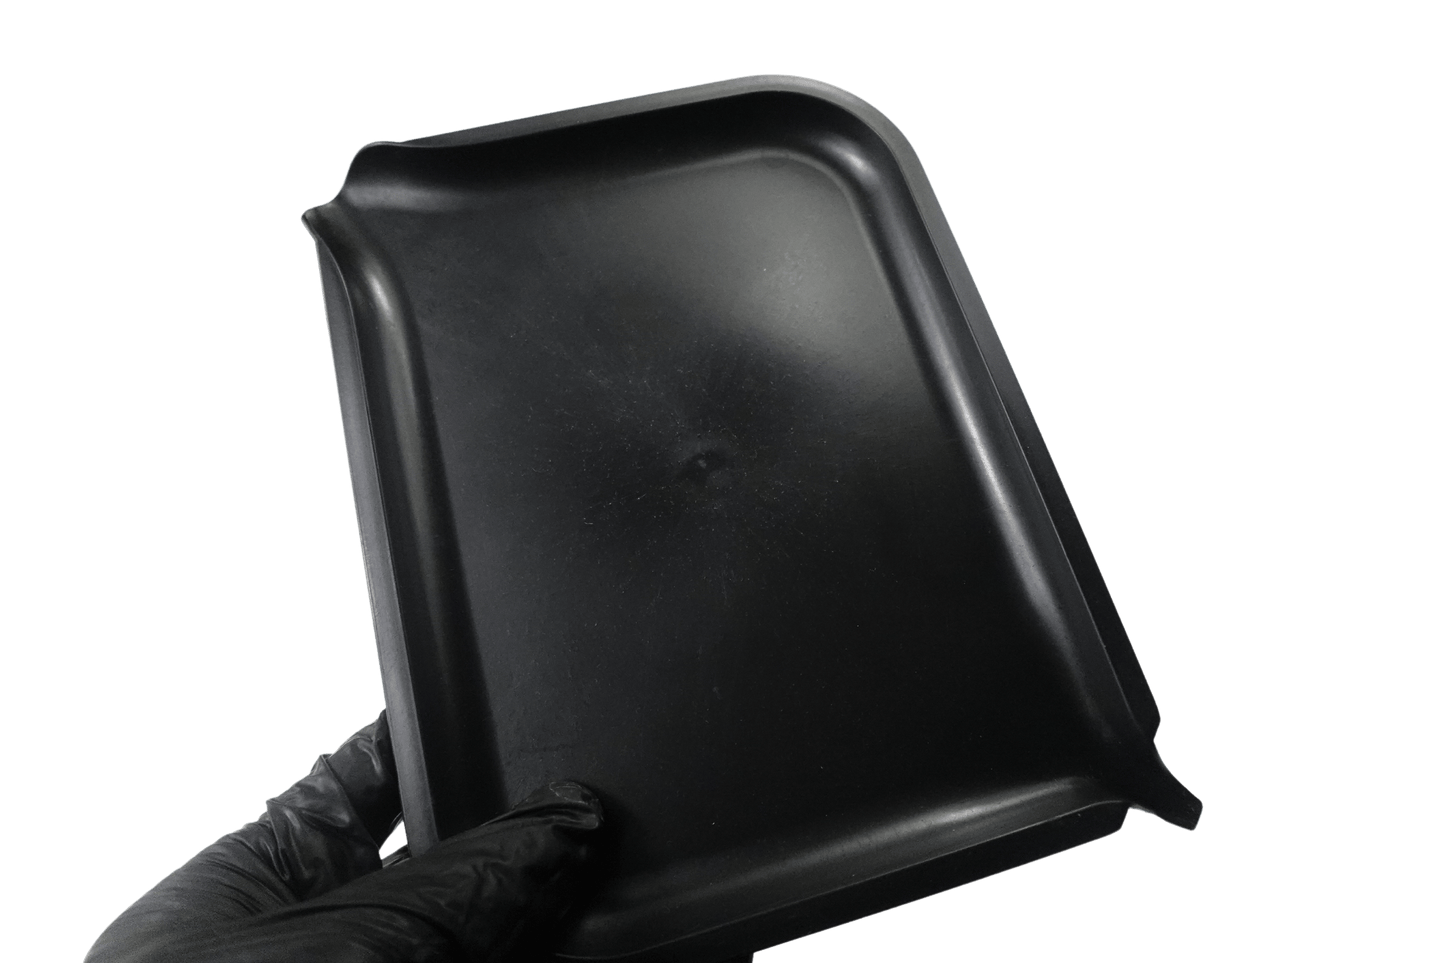 Cloud 8 Smoke Accessory Rolling Tray 8.5X6.5 Inches Small Fiber Biodegradable Rolling Tray with Pouring Funnel